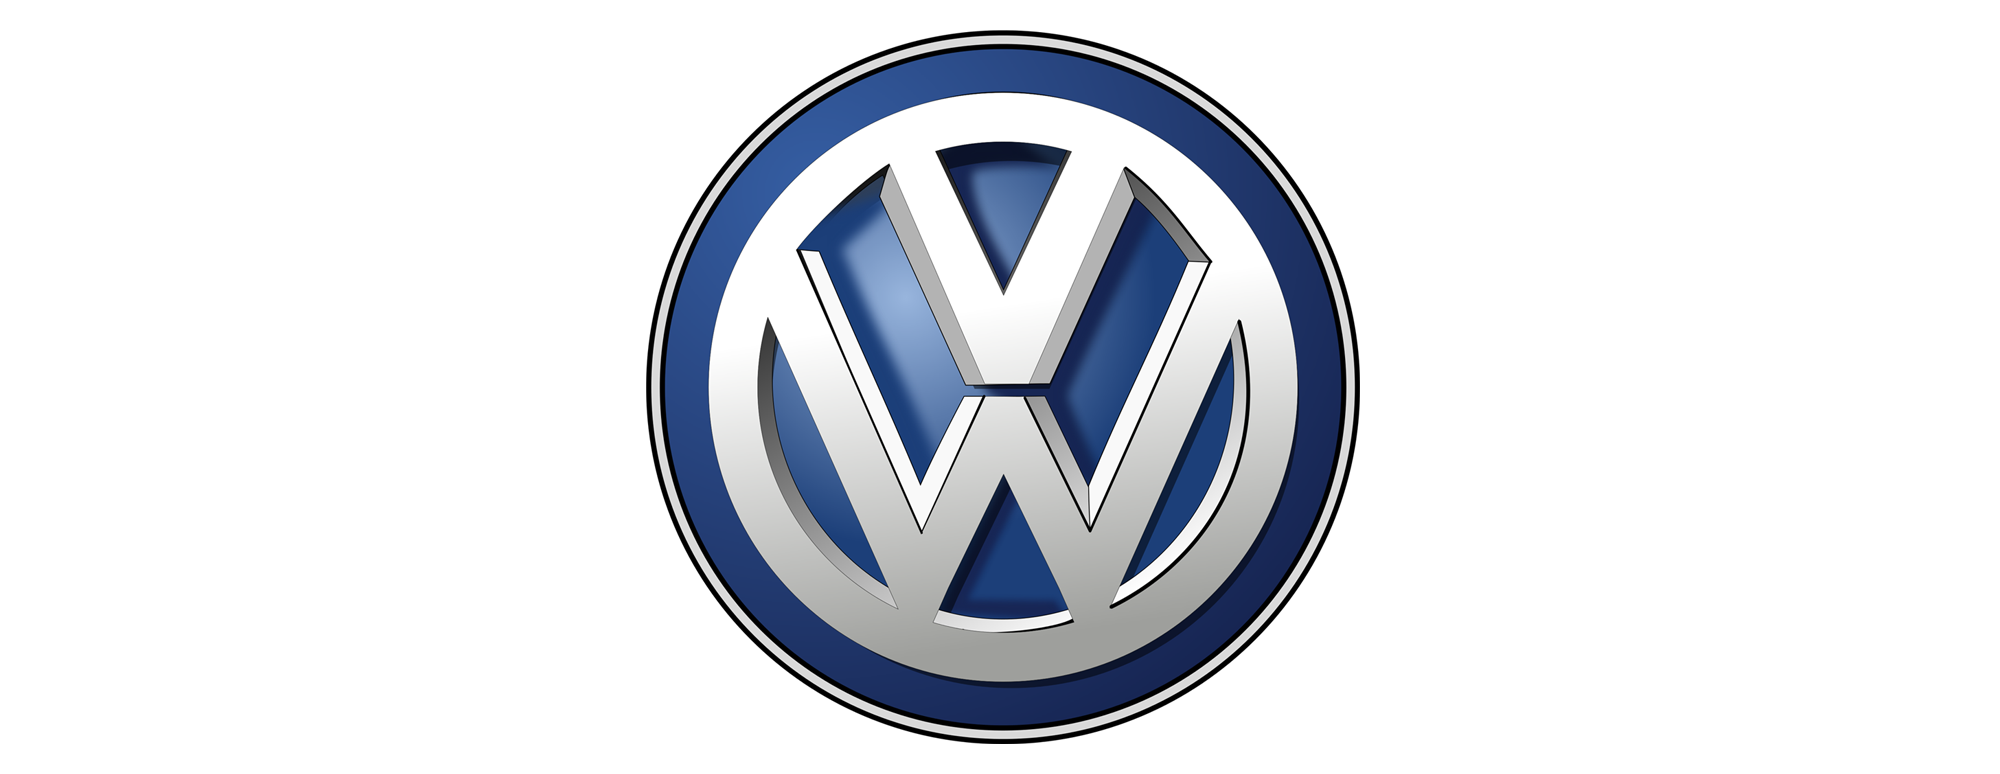 Volkswagen Logo Meaning and History, latest models | World Cars Brands